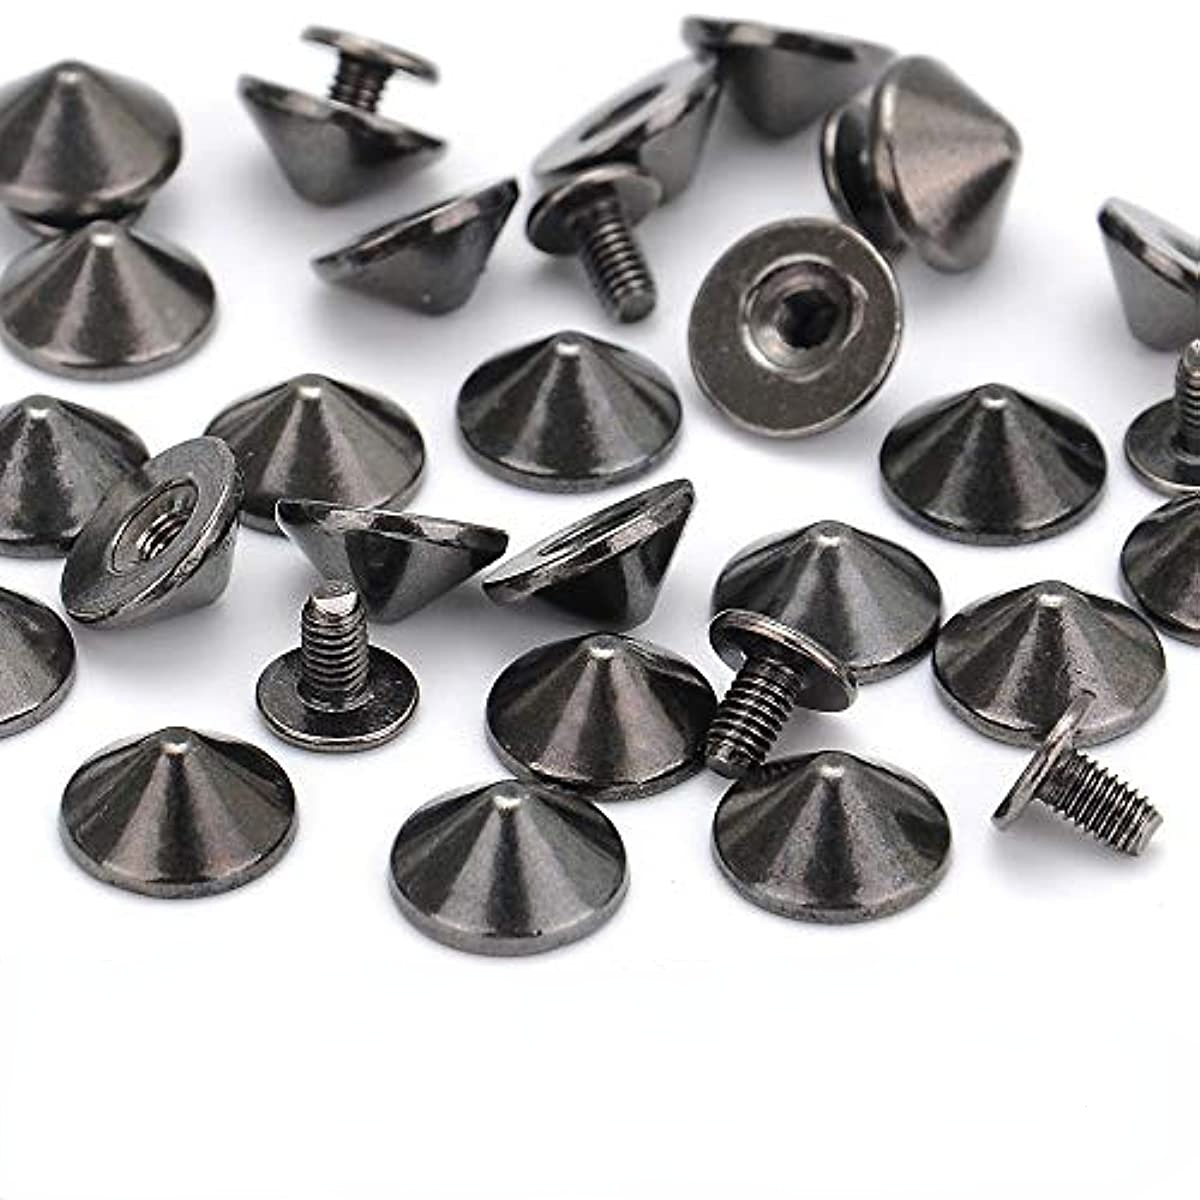 20 Sets 55mm Large Spikes for Clothing, Silver Cone Spikes and